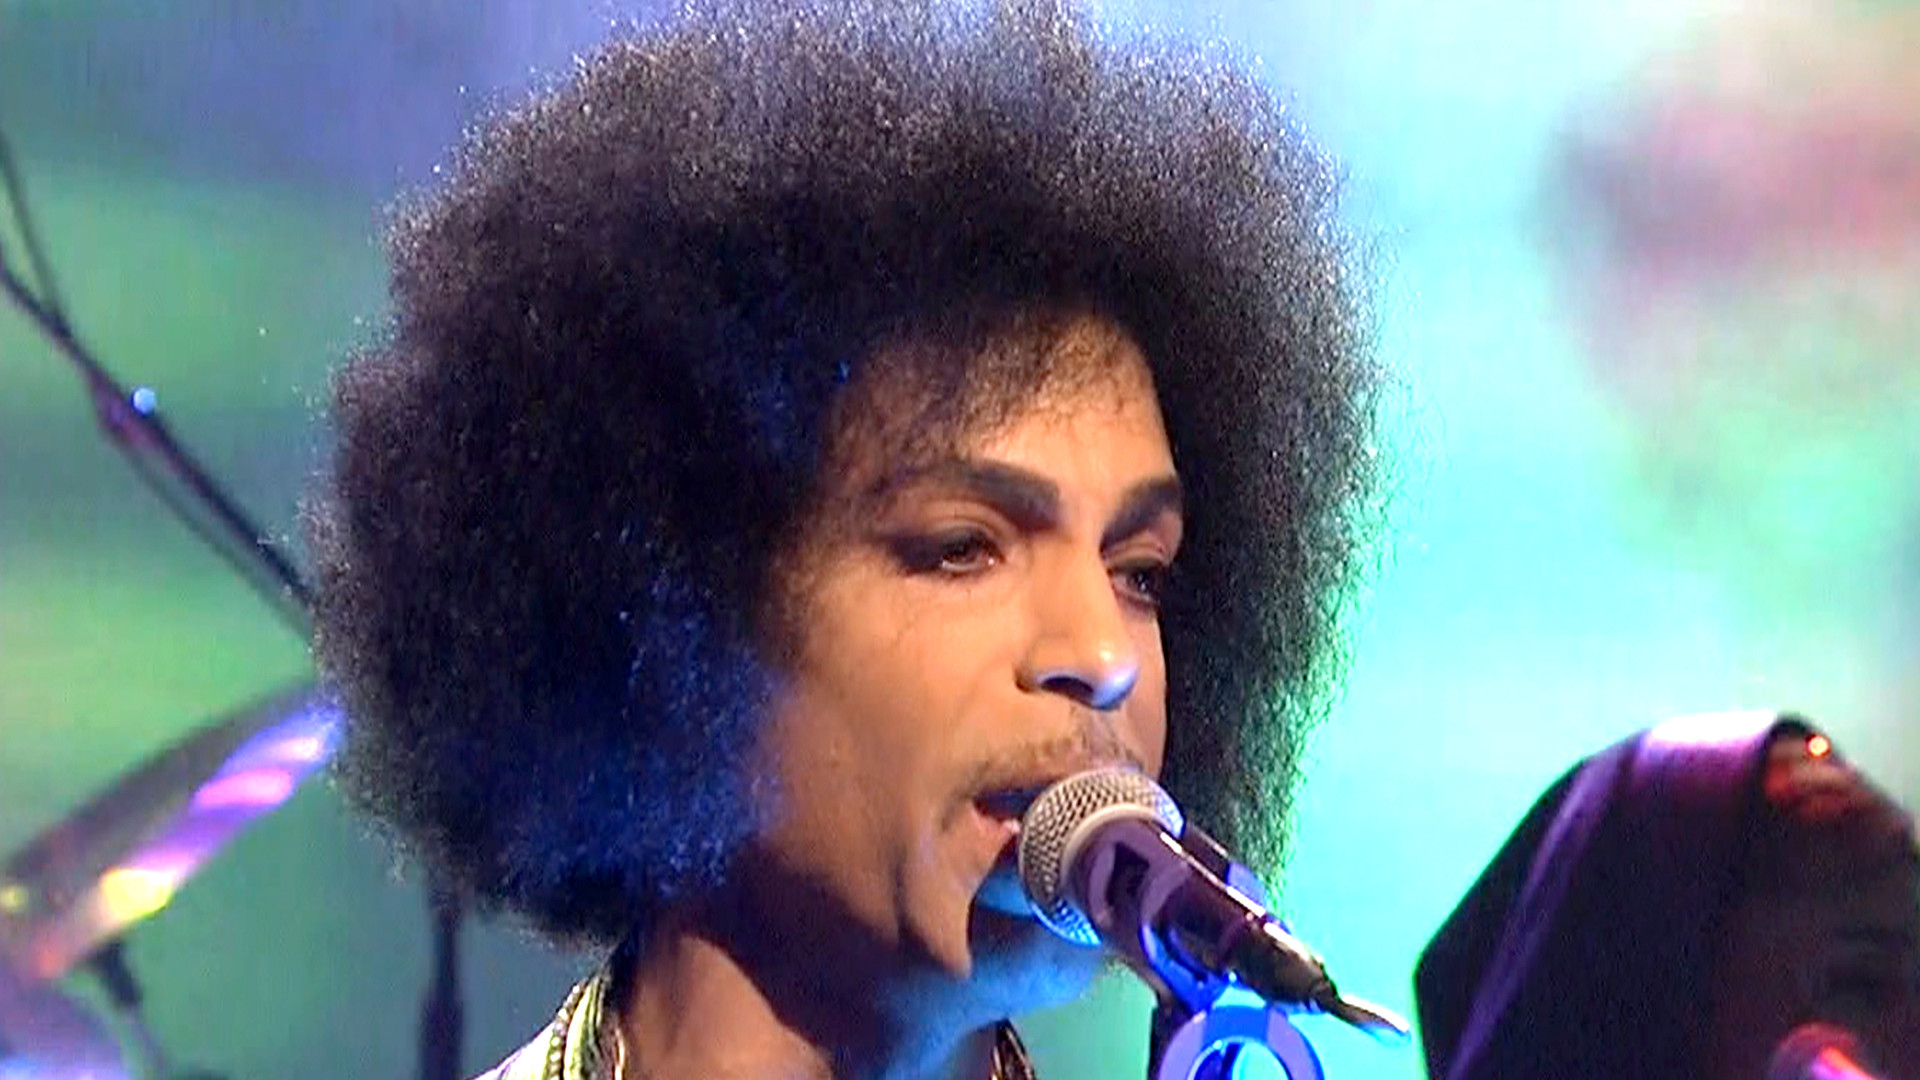 1920x1080 Prince steals the show with 8-minute set on 'SNL'